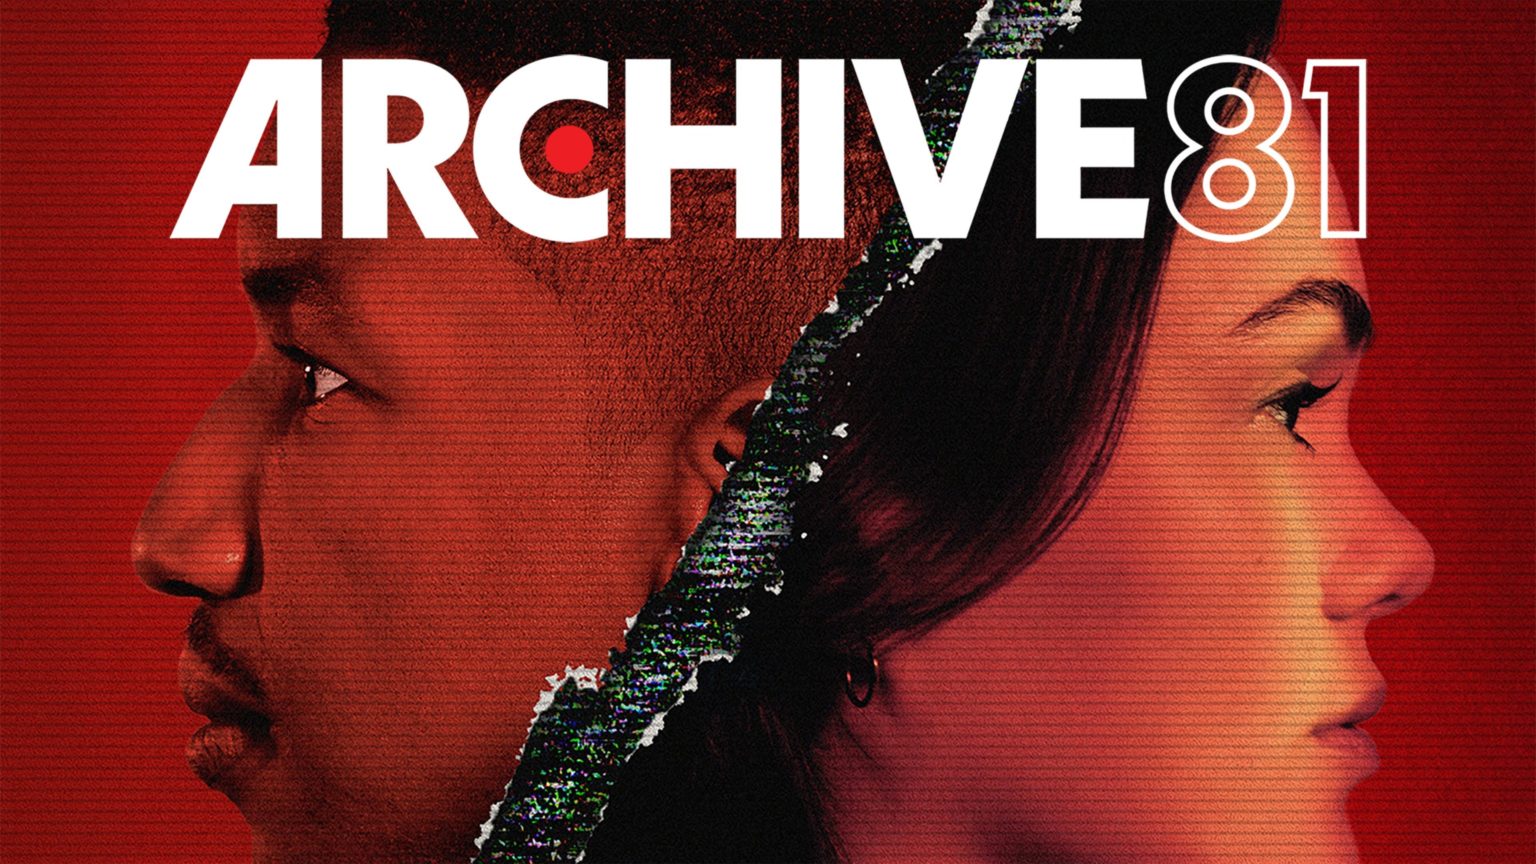 movie review archive 81